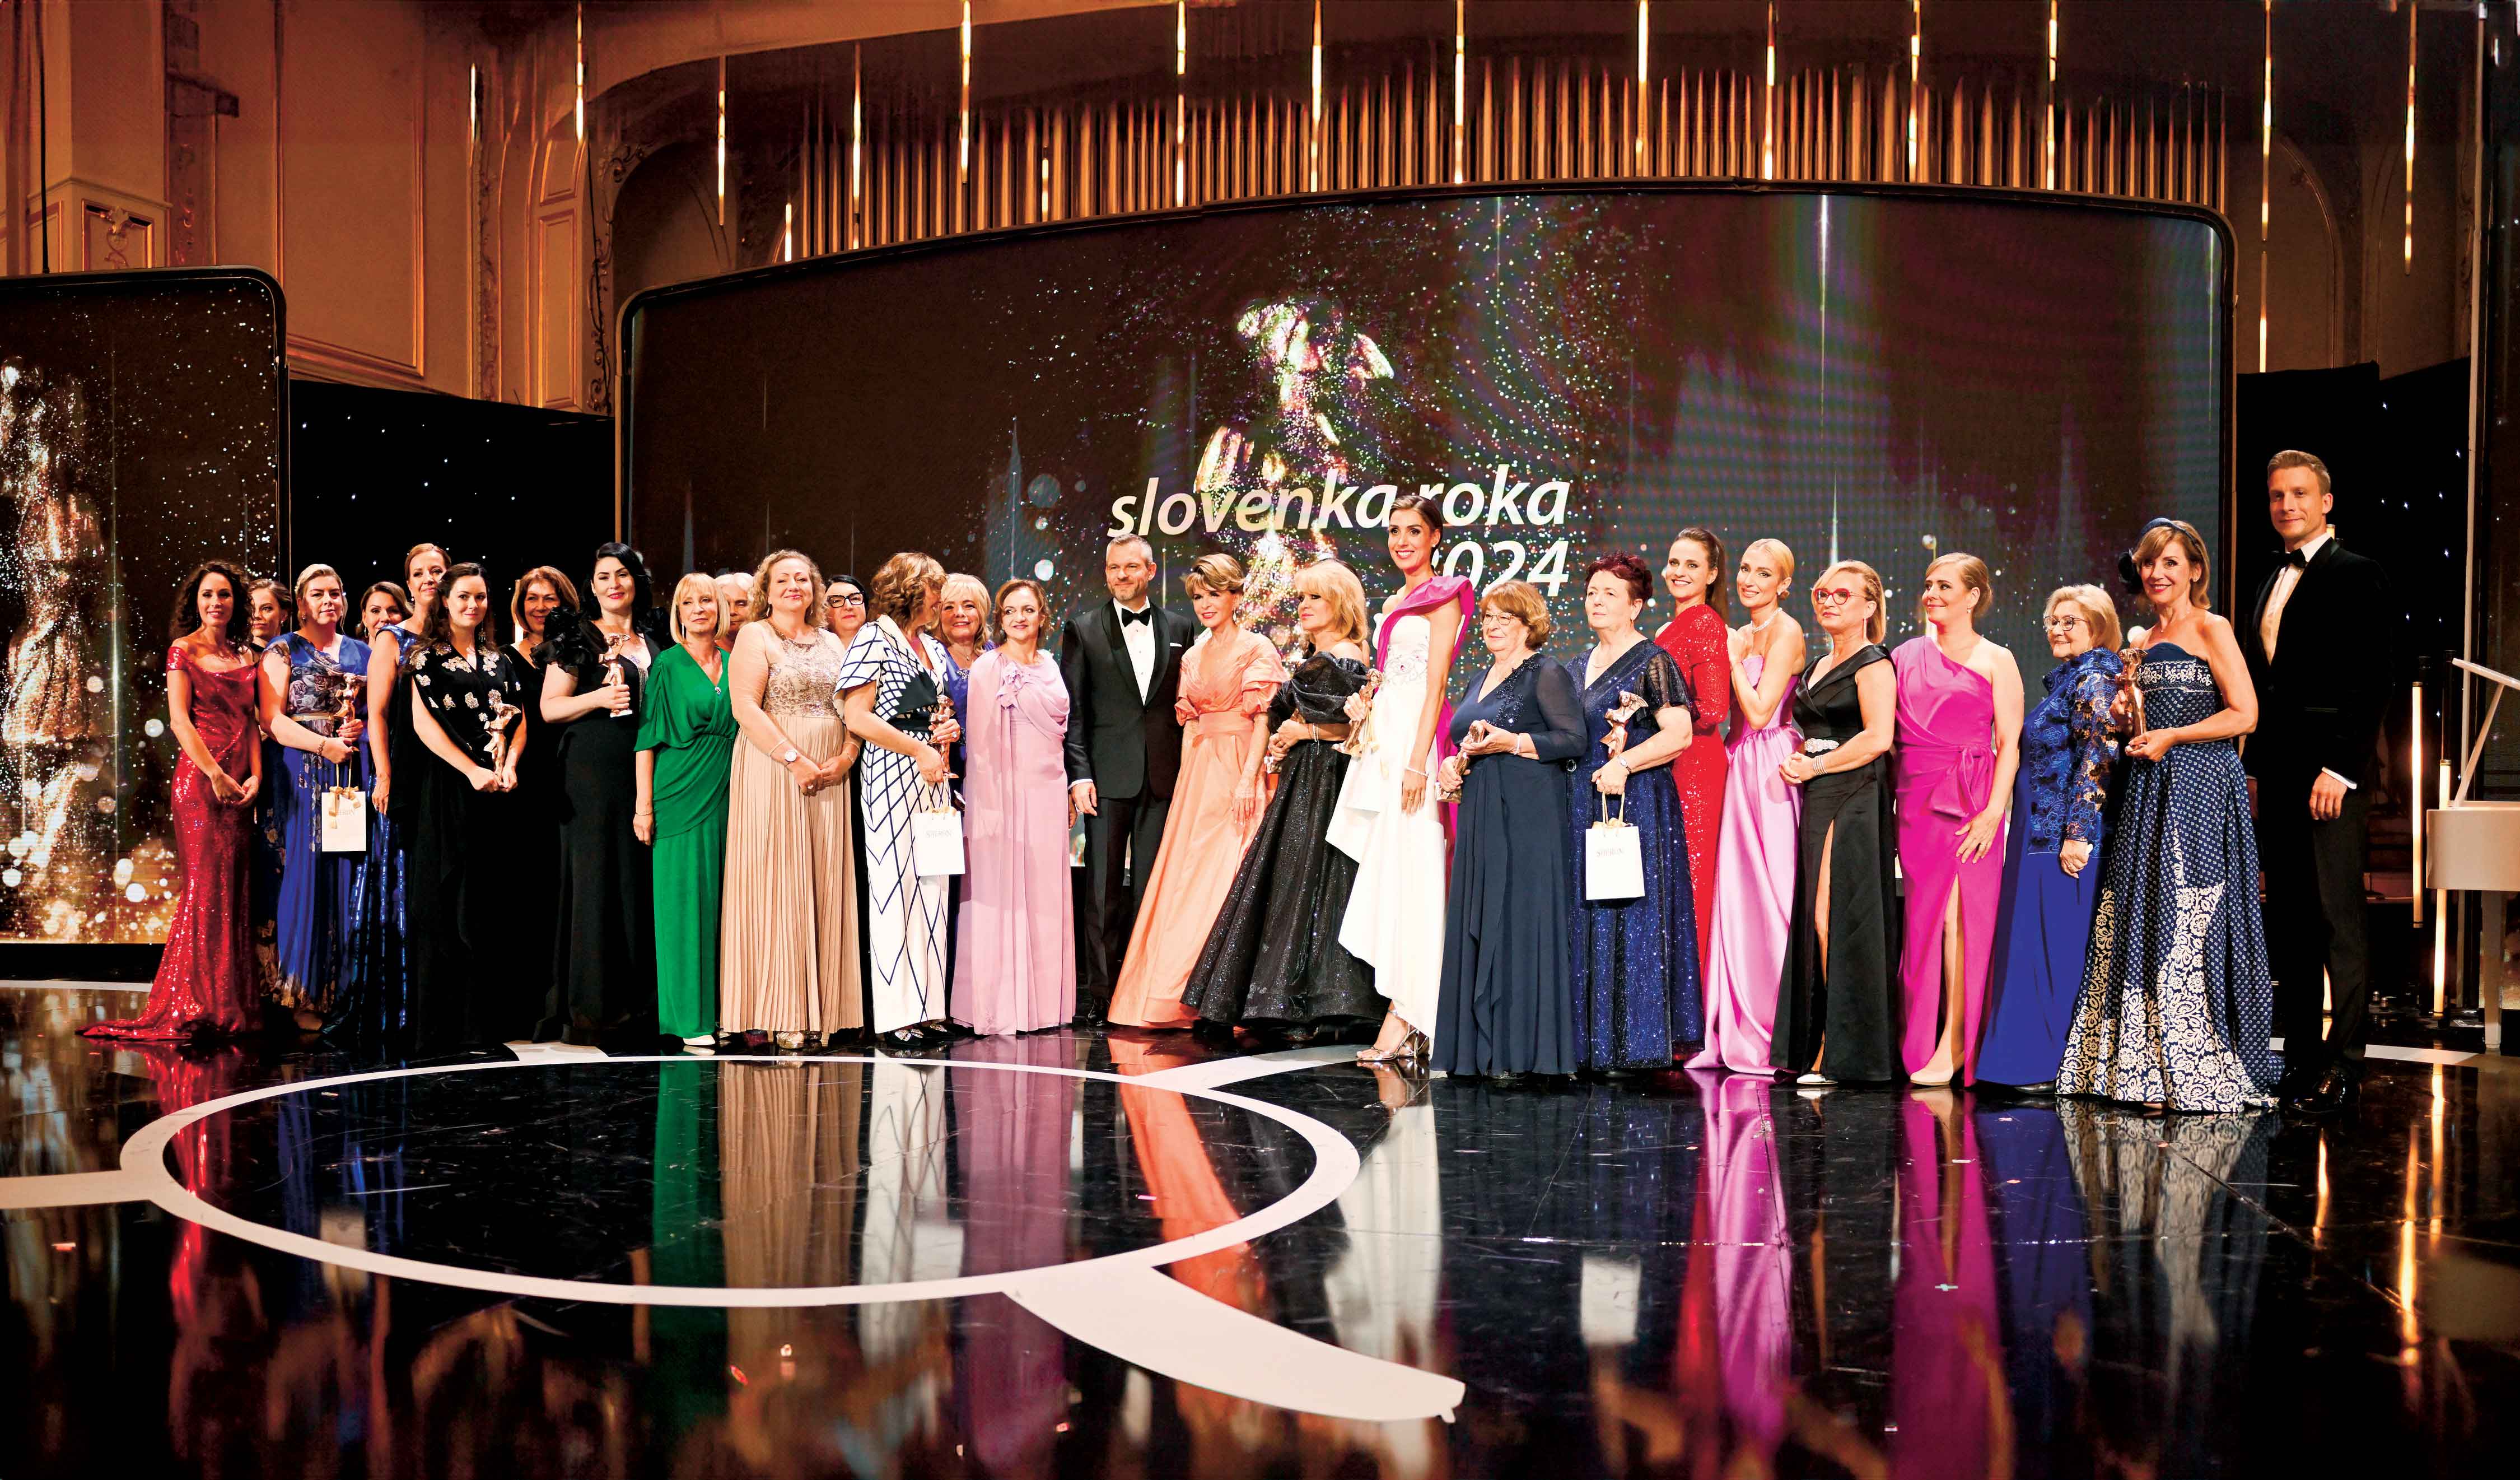 Slovak Woman of the Year in grand style